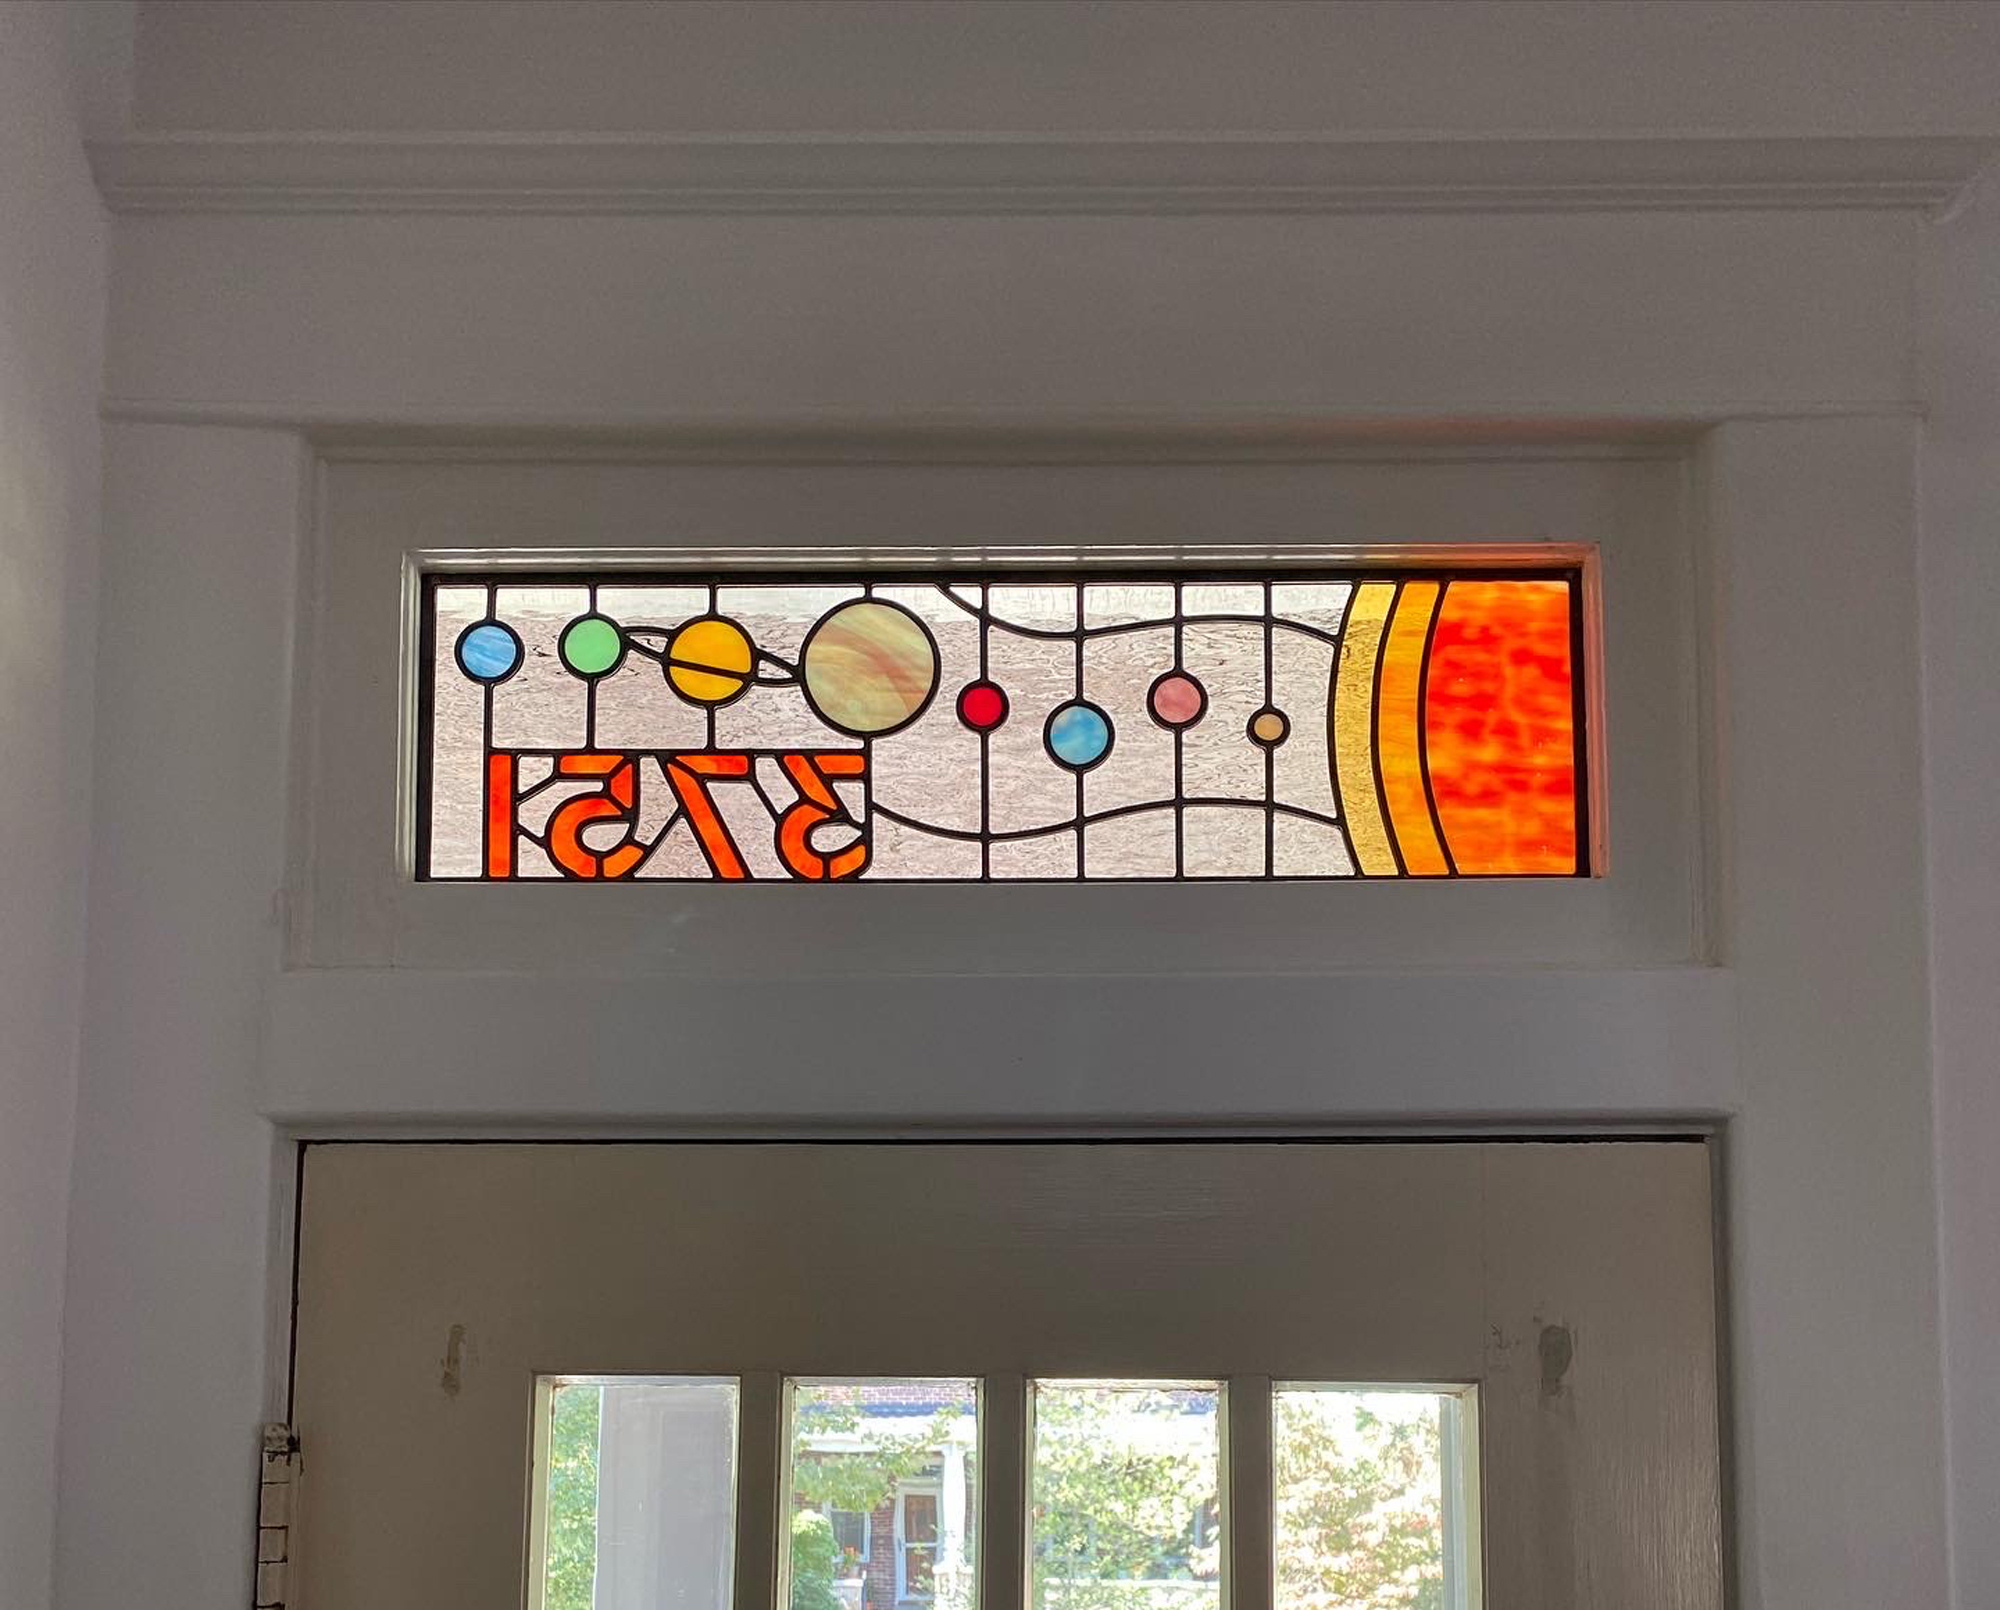 Stained glass transom with solar system